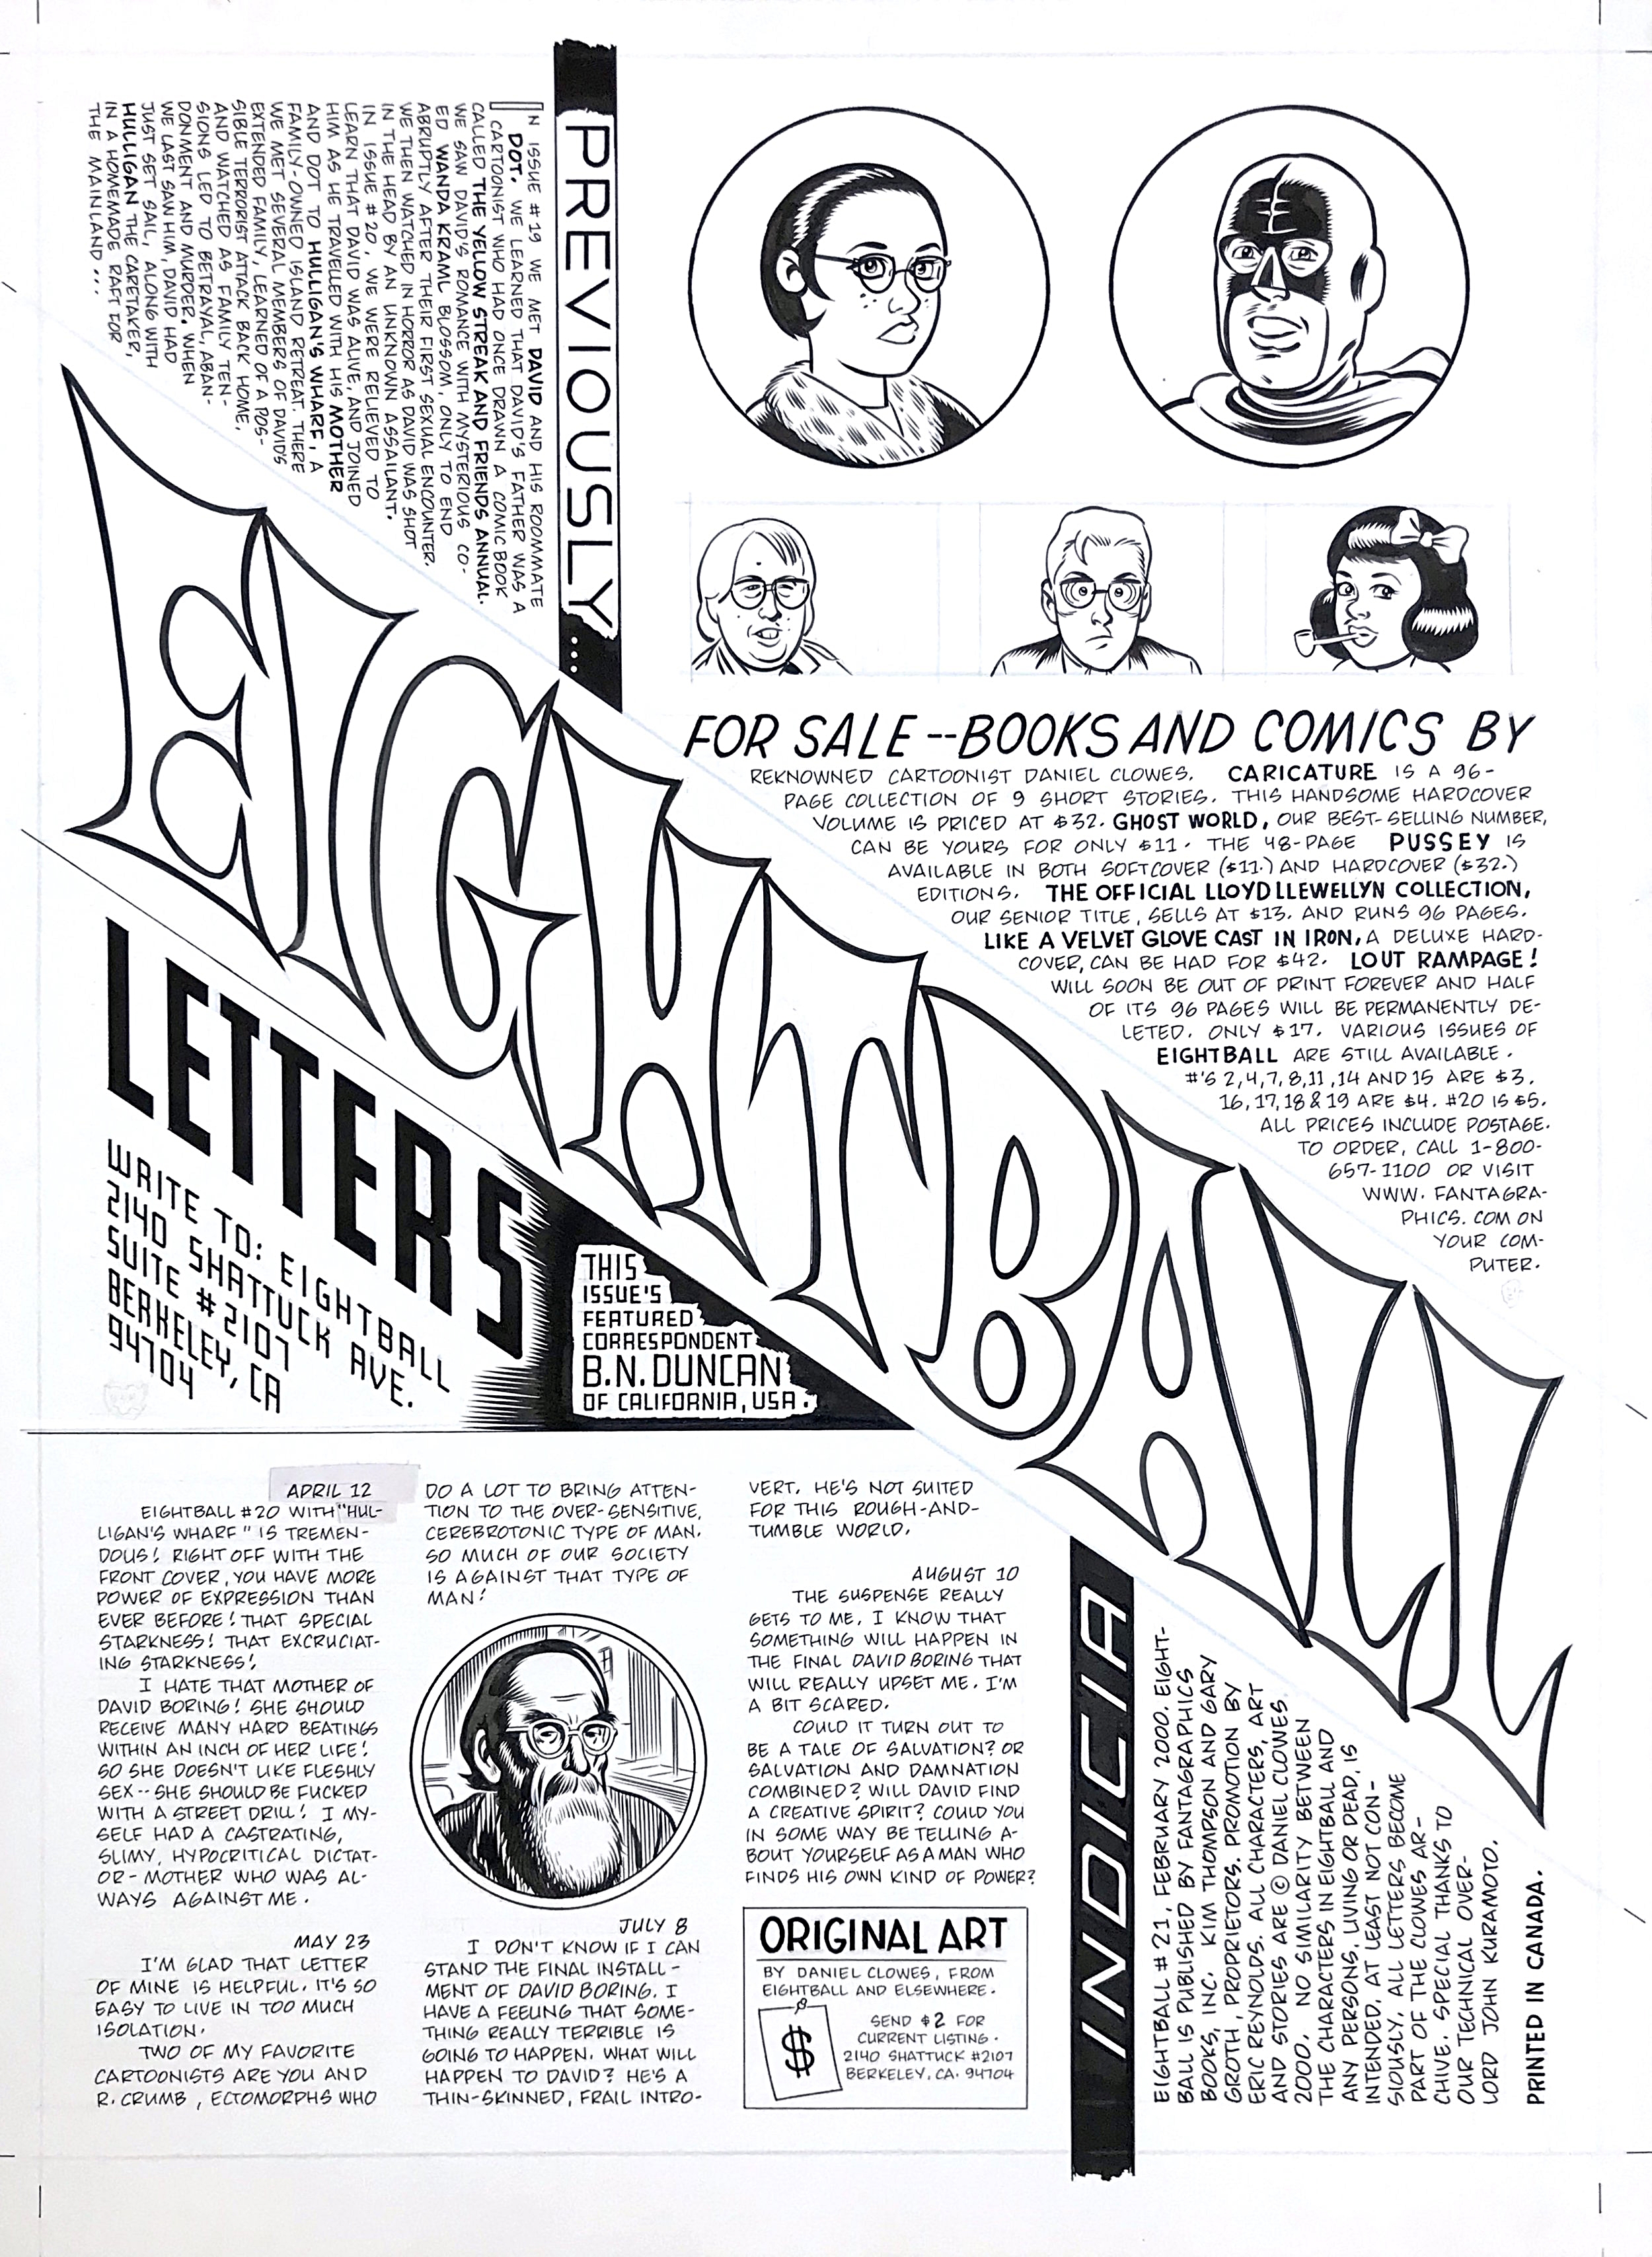 EIGHTBALL LETTERS PAGE